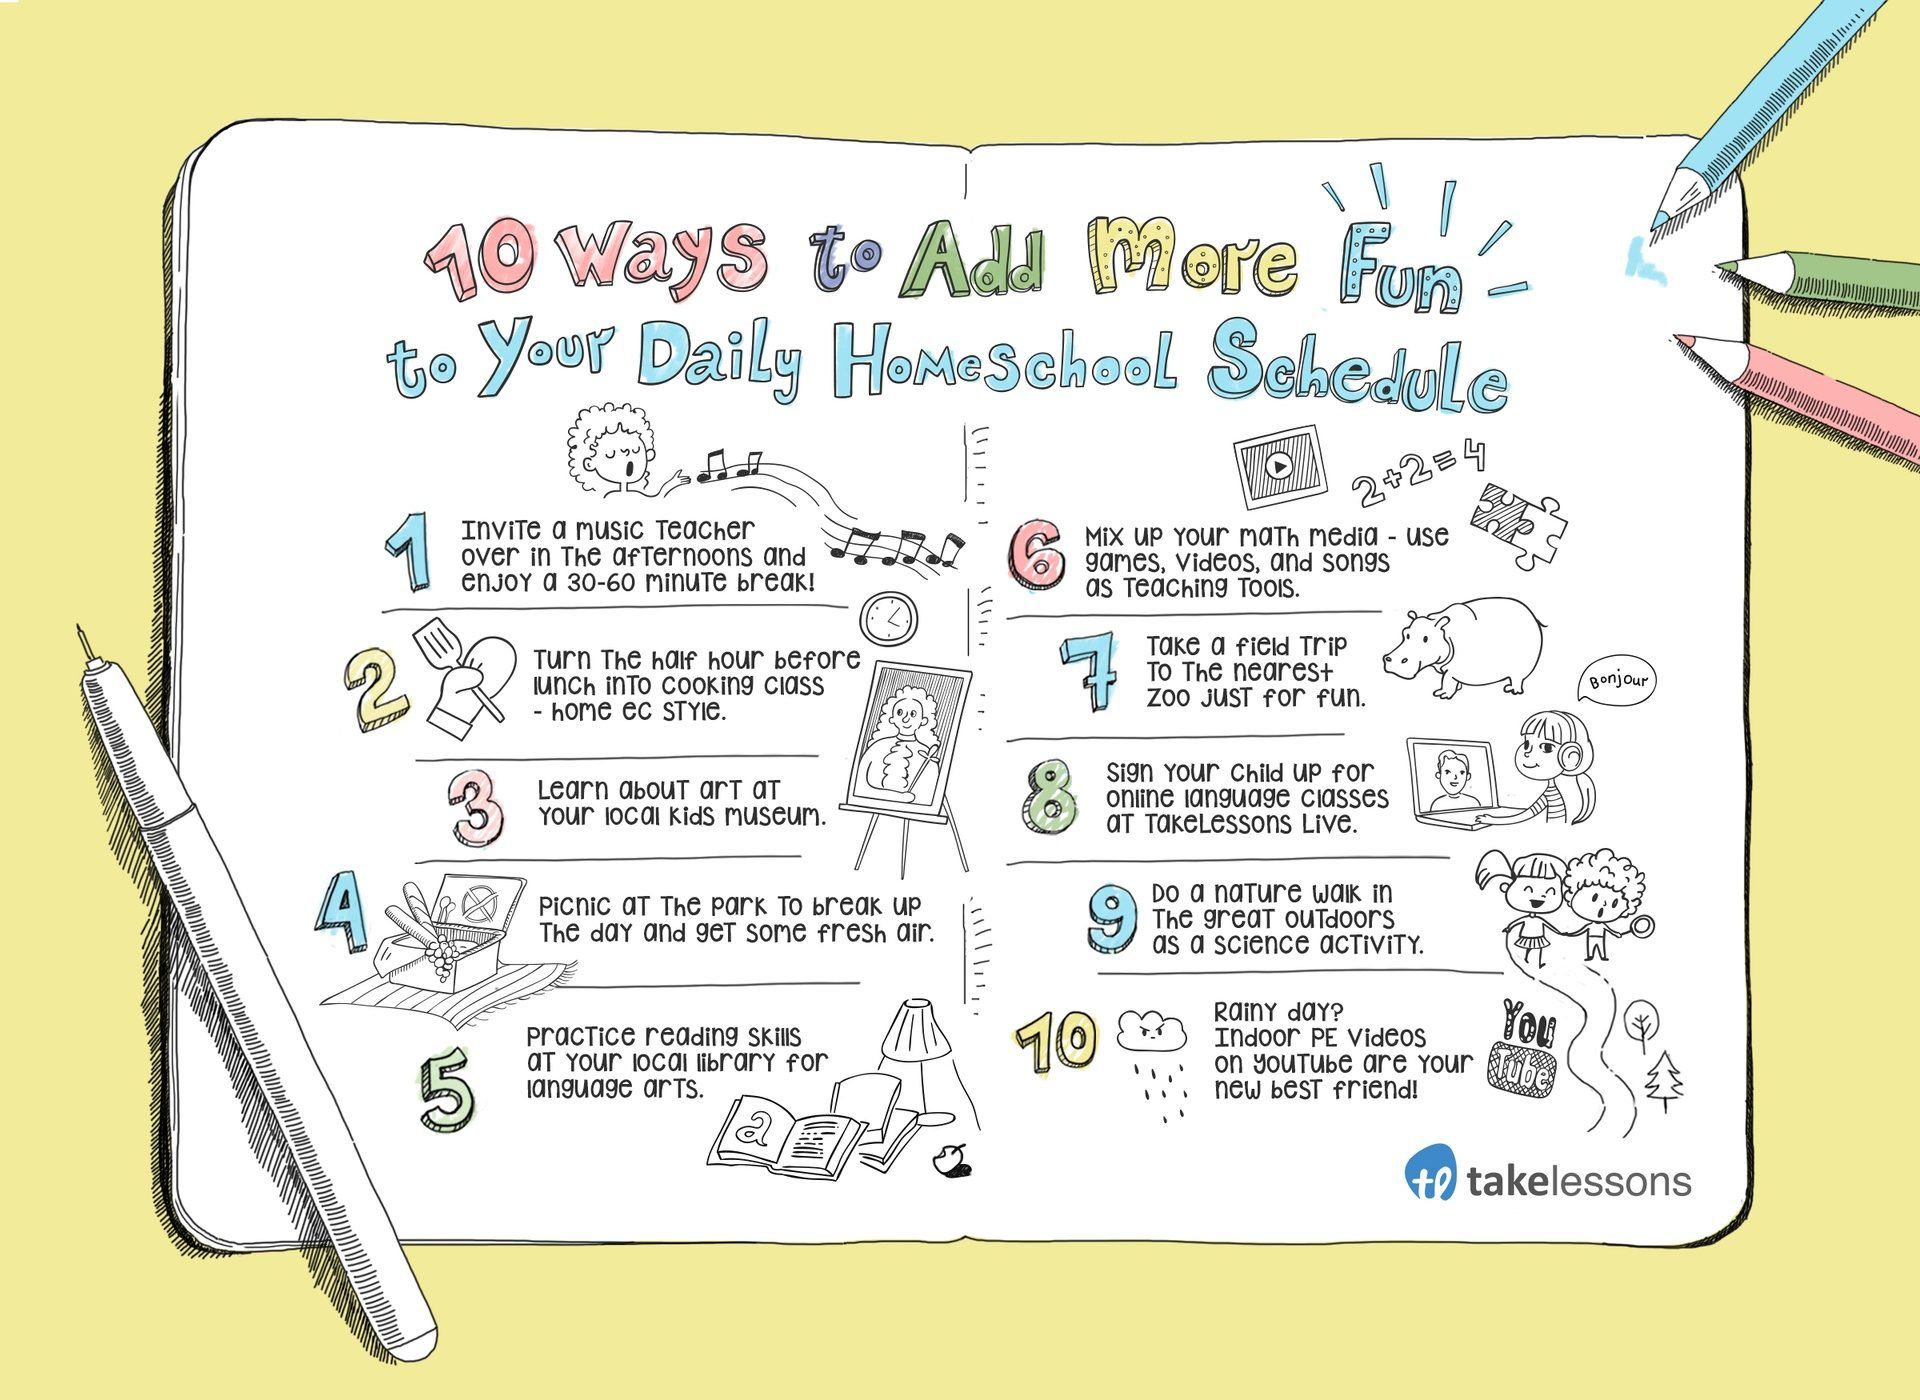 10 Ways to Add More Fun to Your Daily Homeschool Schedule Infographic